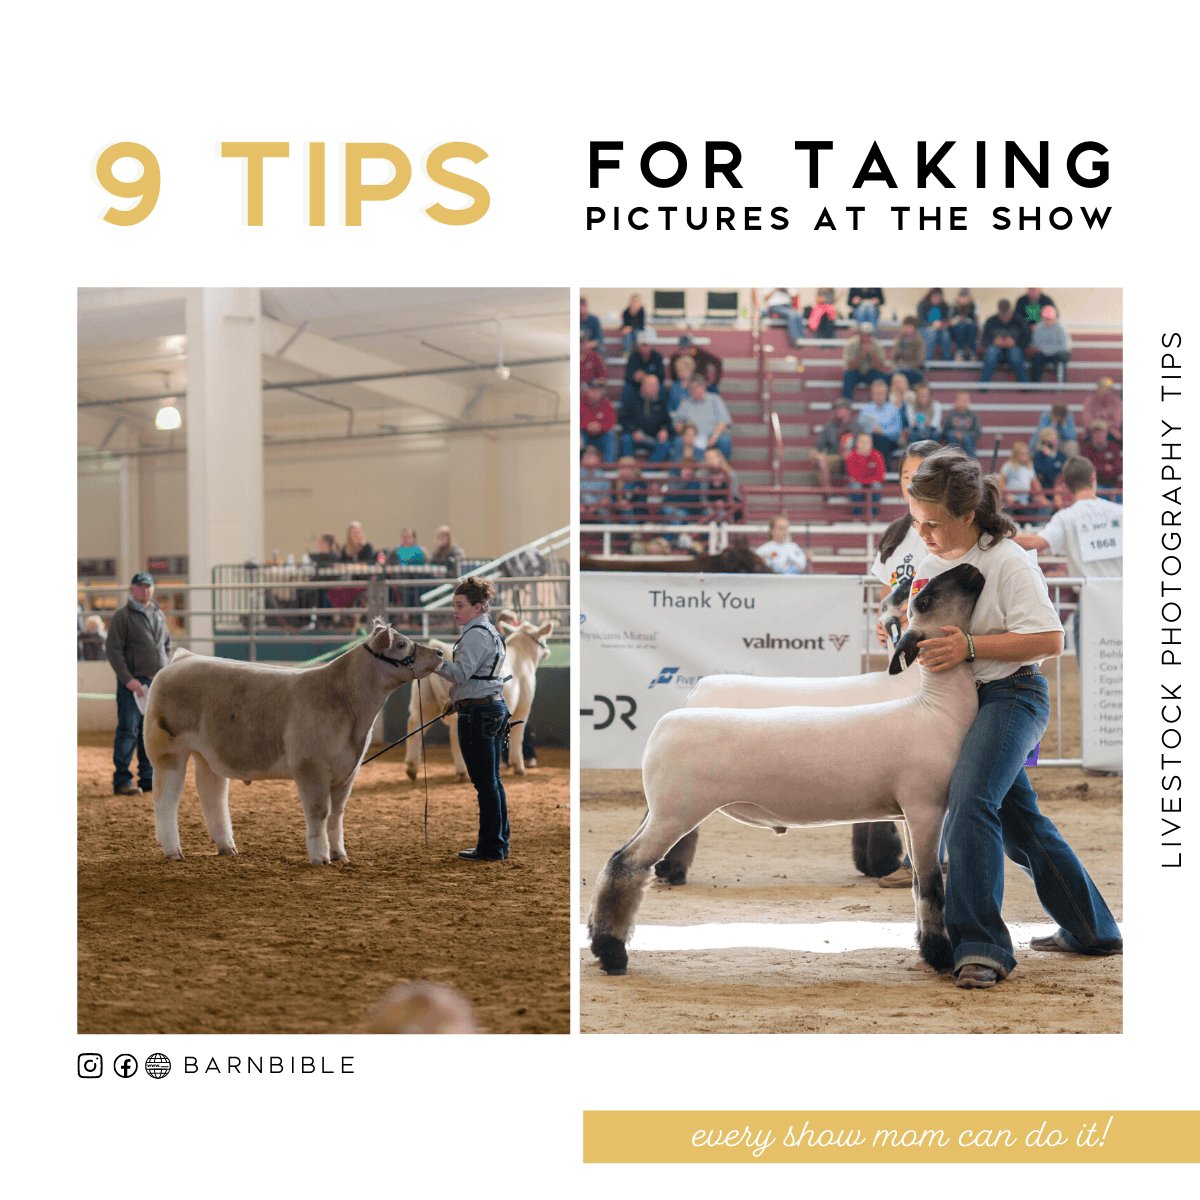 9 Tips for Taking Pictures at the Show - Livestock & Co.